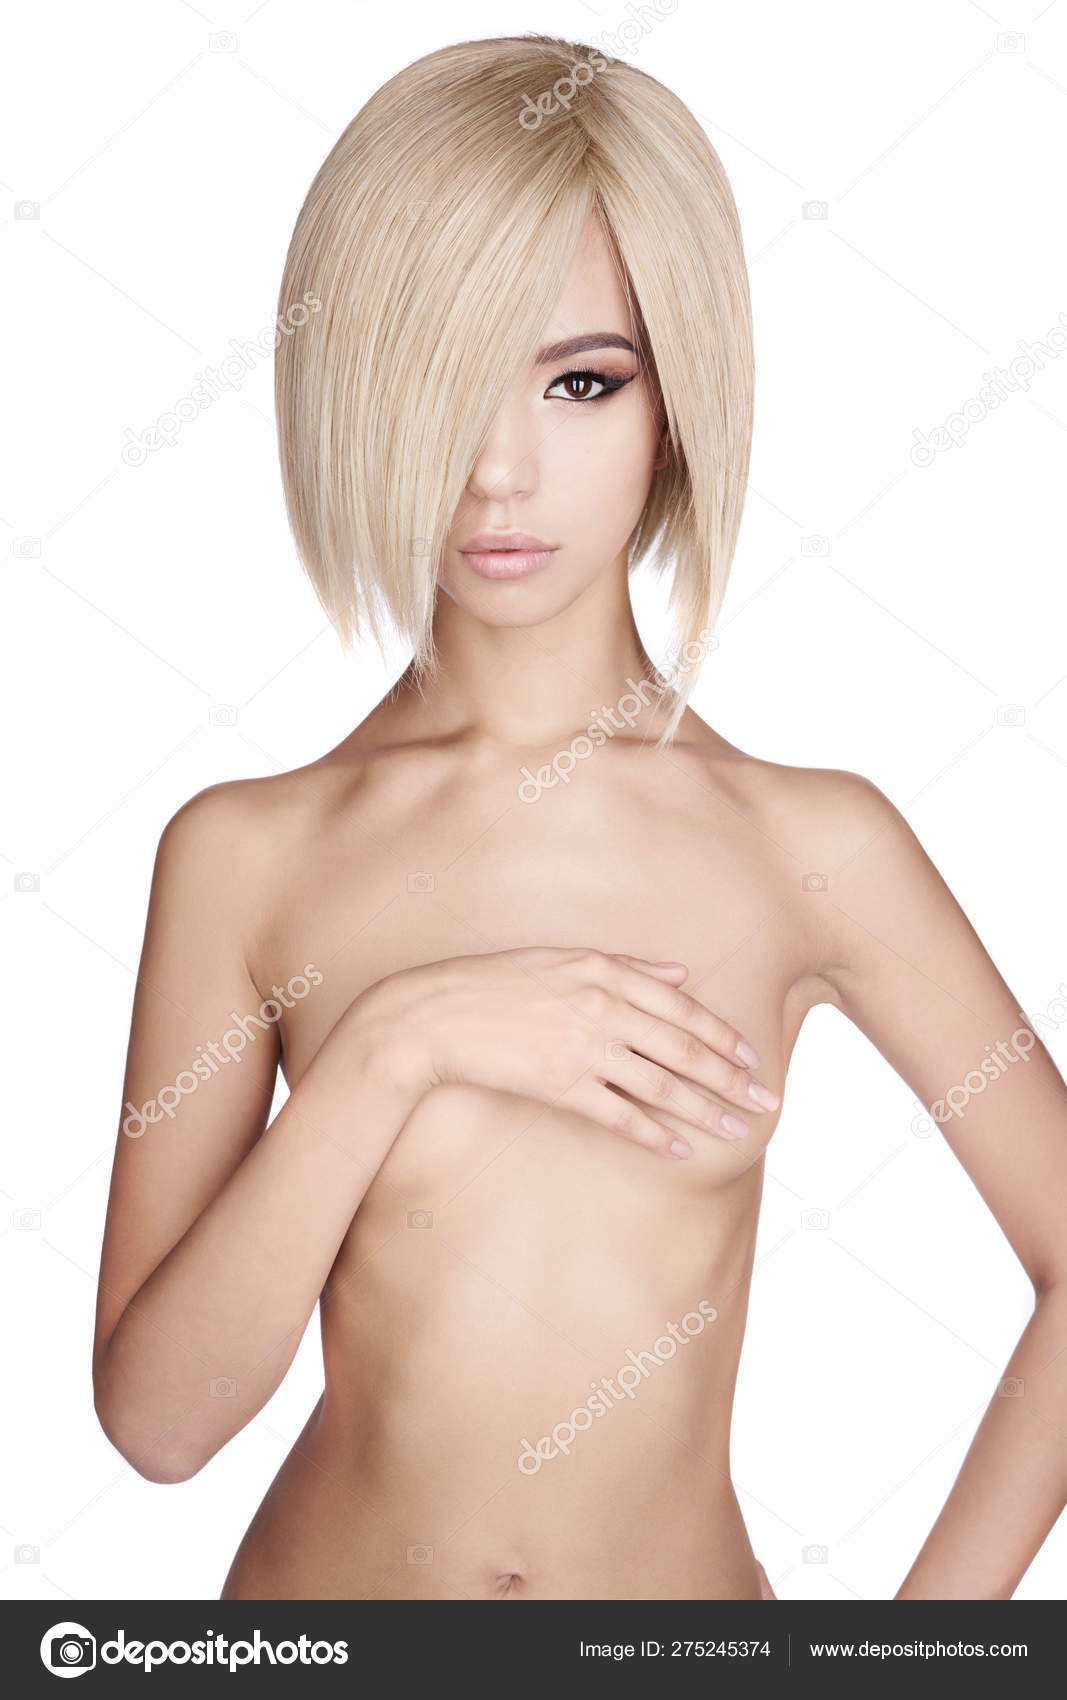 Short Haired Nude Women